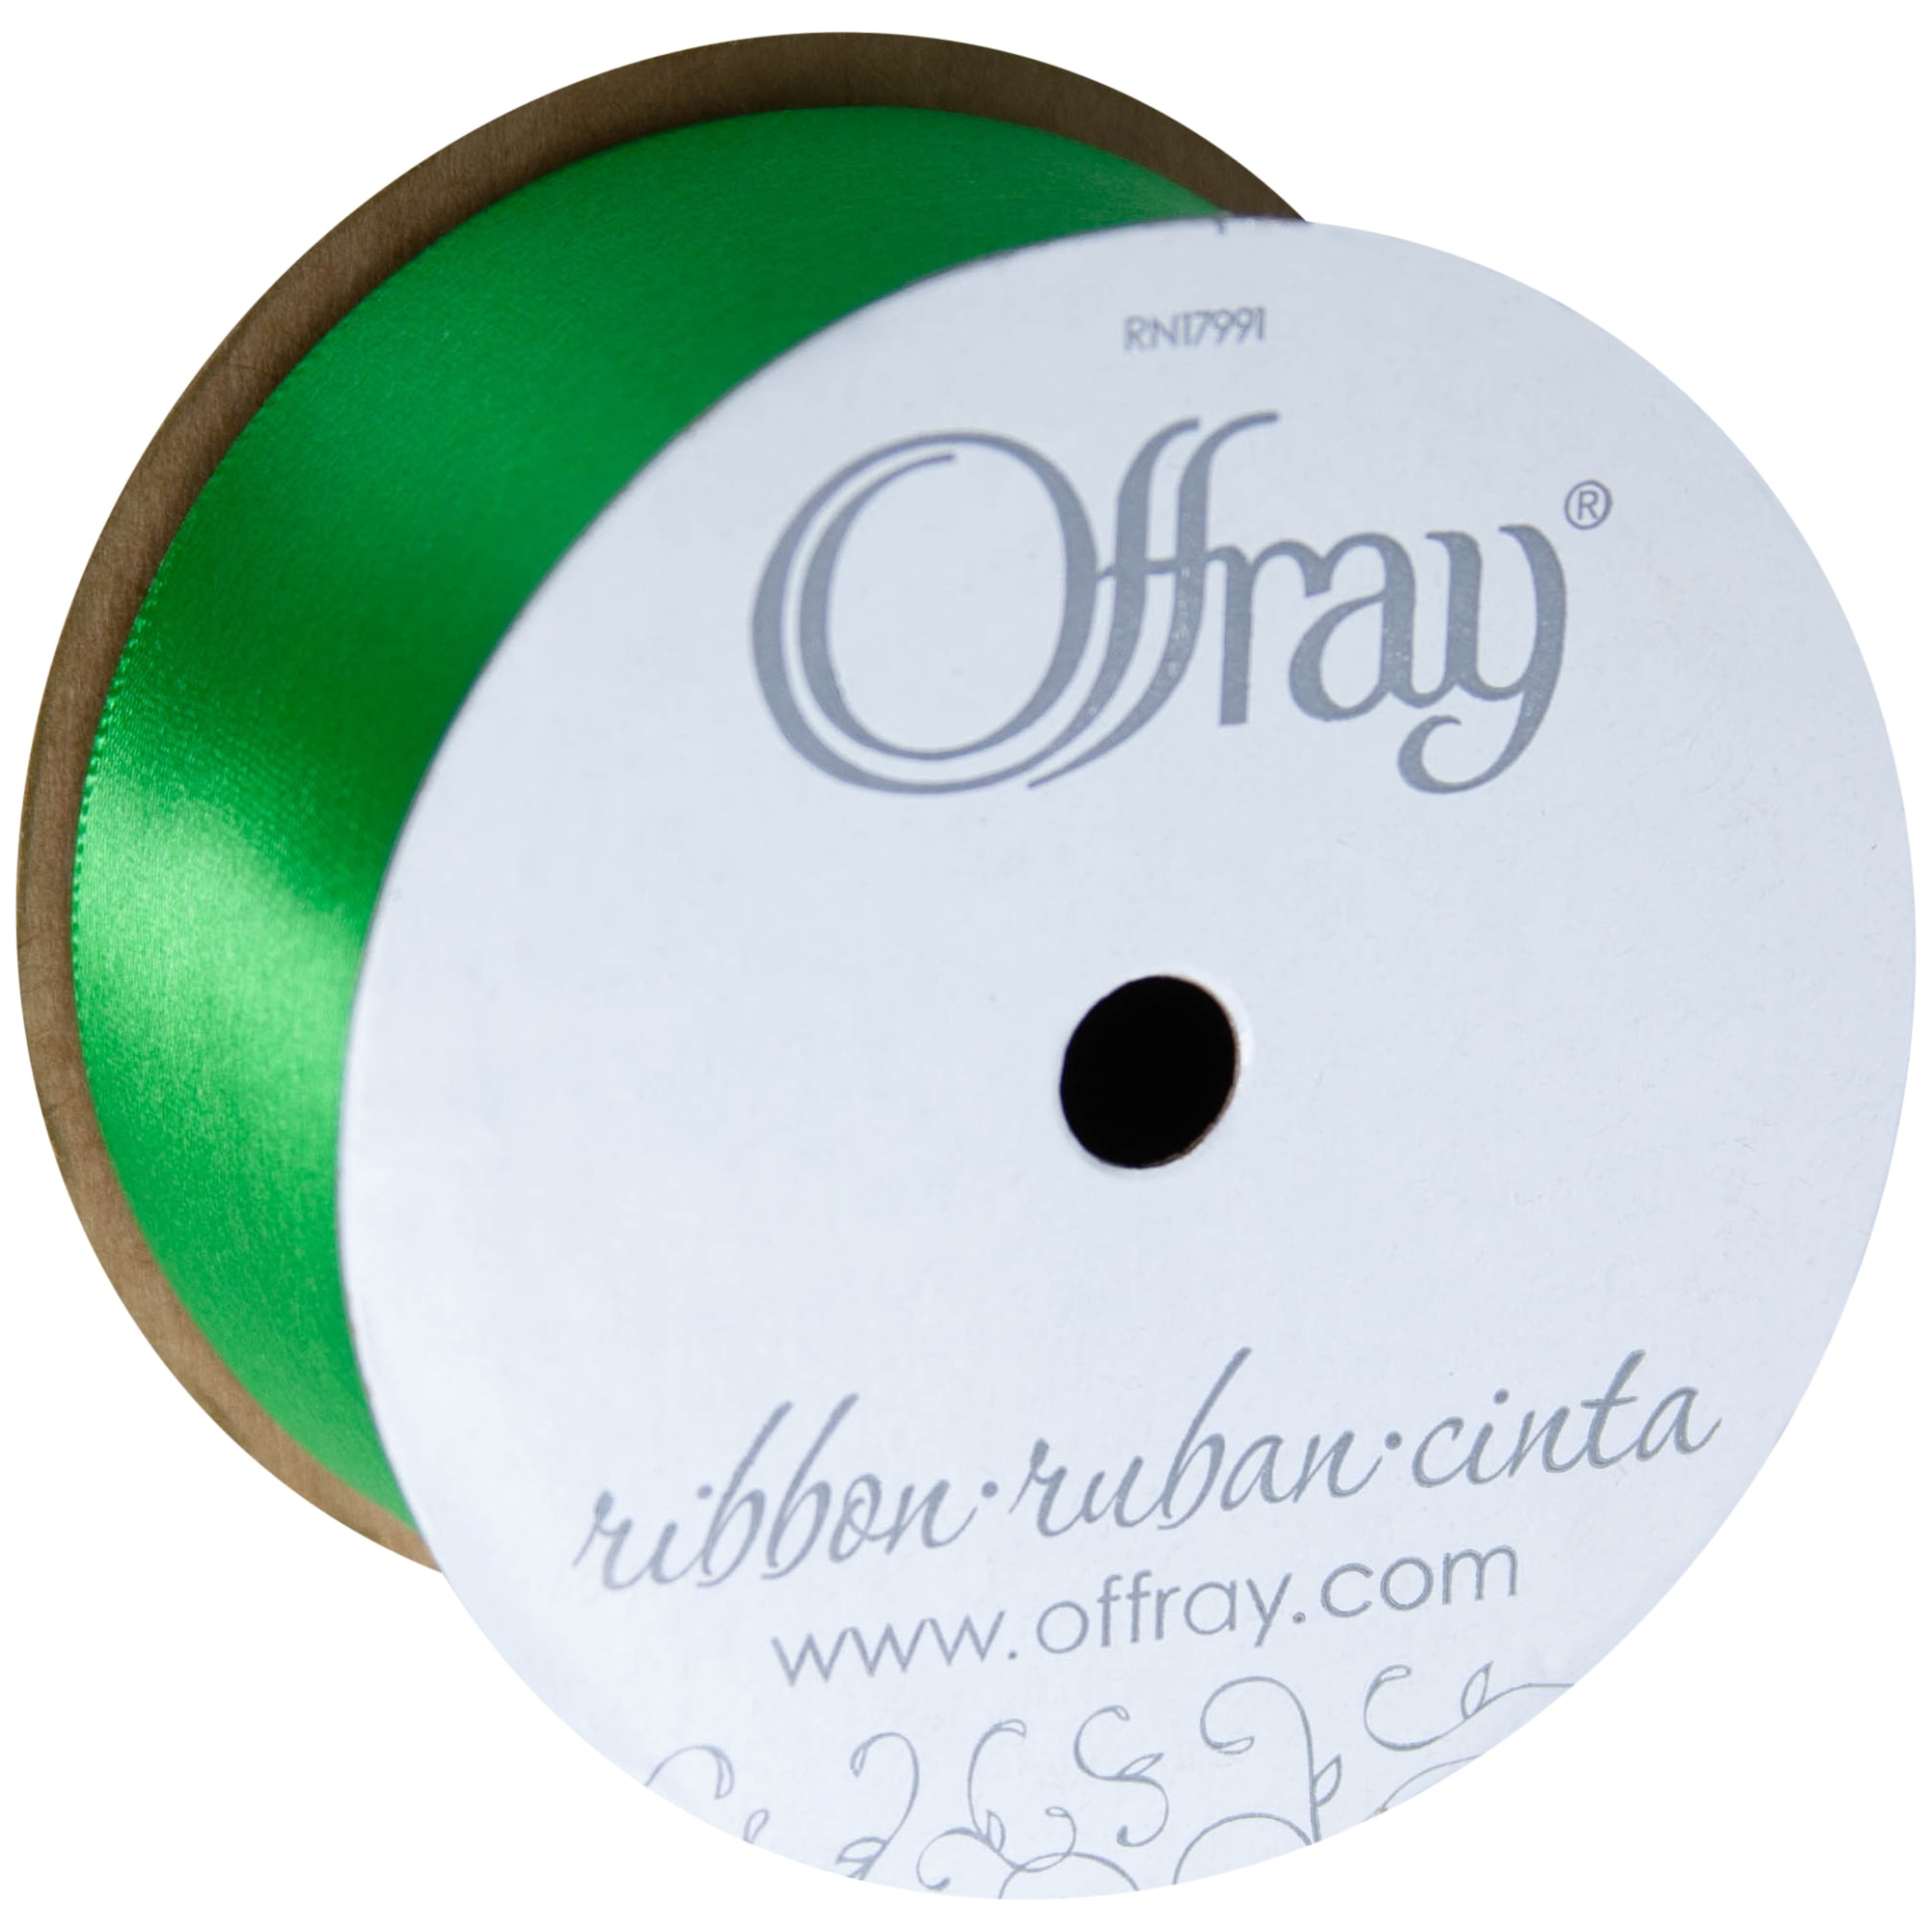 Emerald Green Ribbon, Double Faced Satin Ribbon, Widths Available: 1 1/2,  1, 6/8, 5/8, 3/8, 1/4, 1/8 